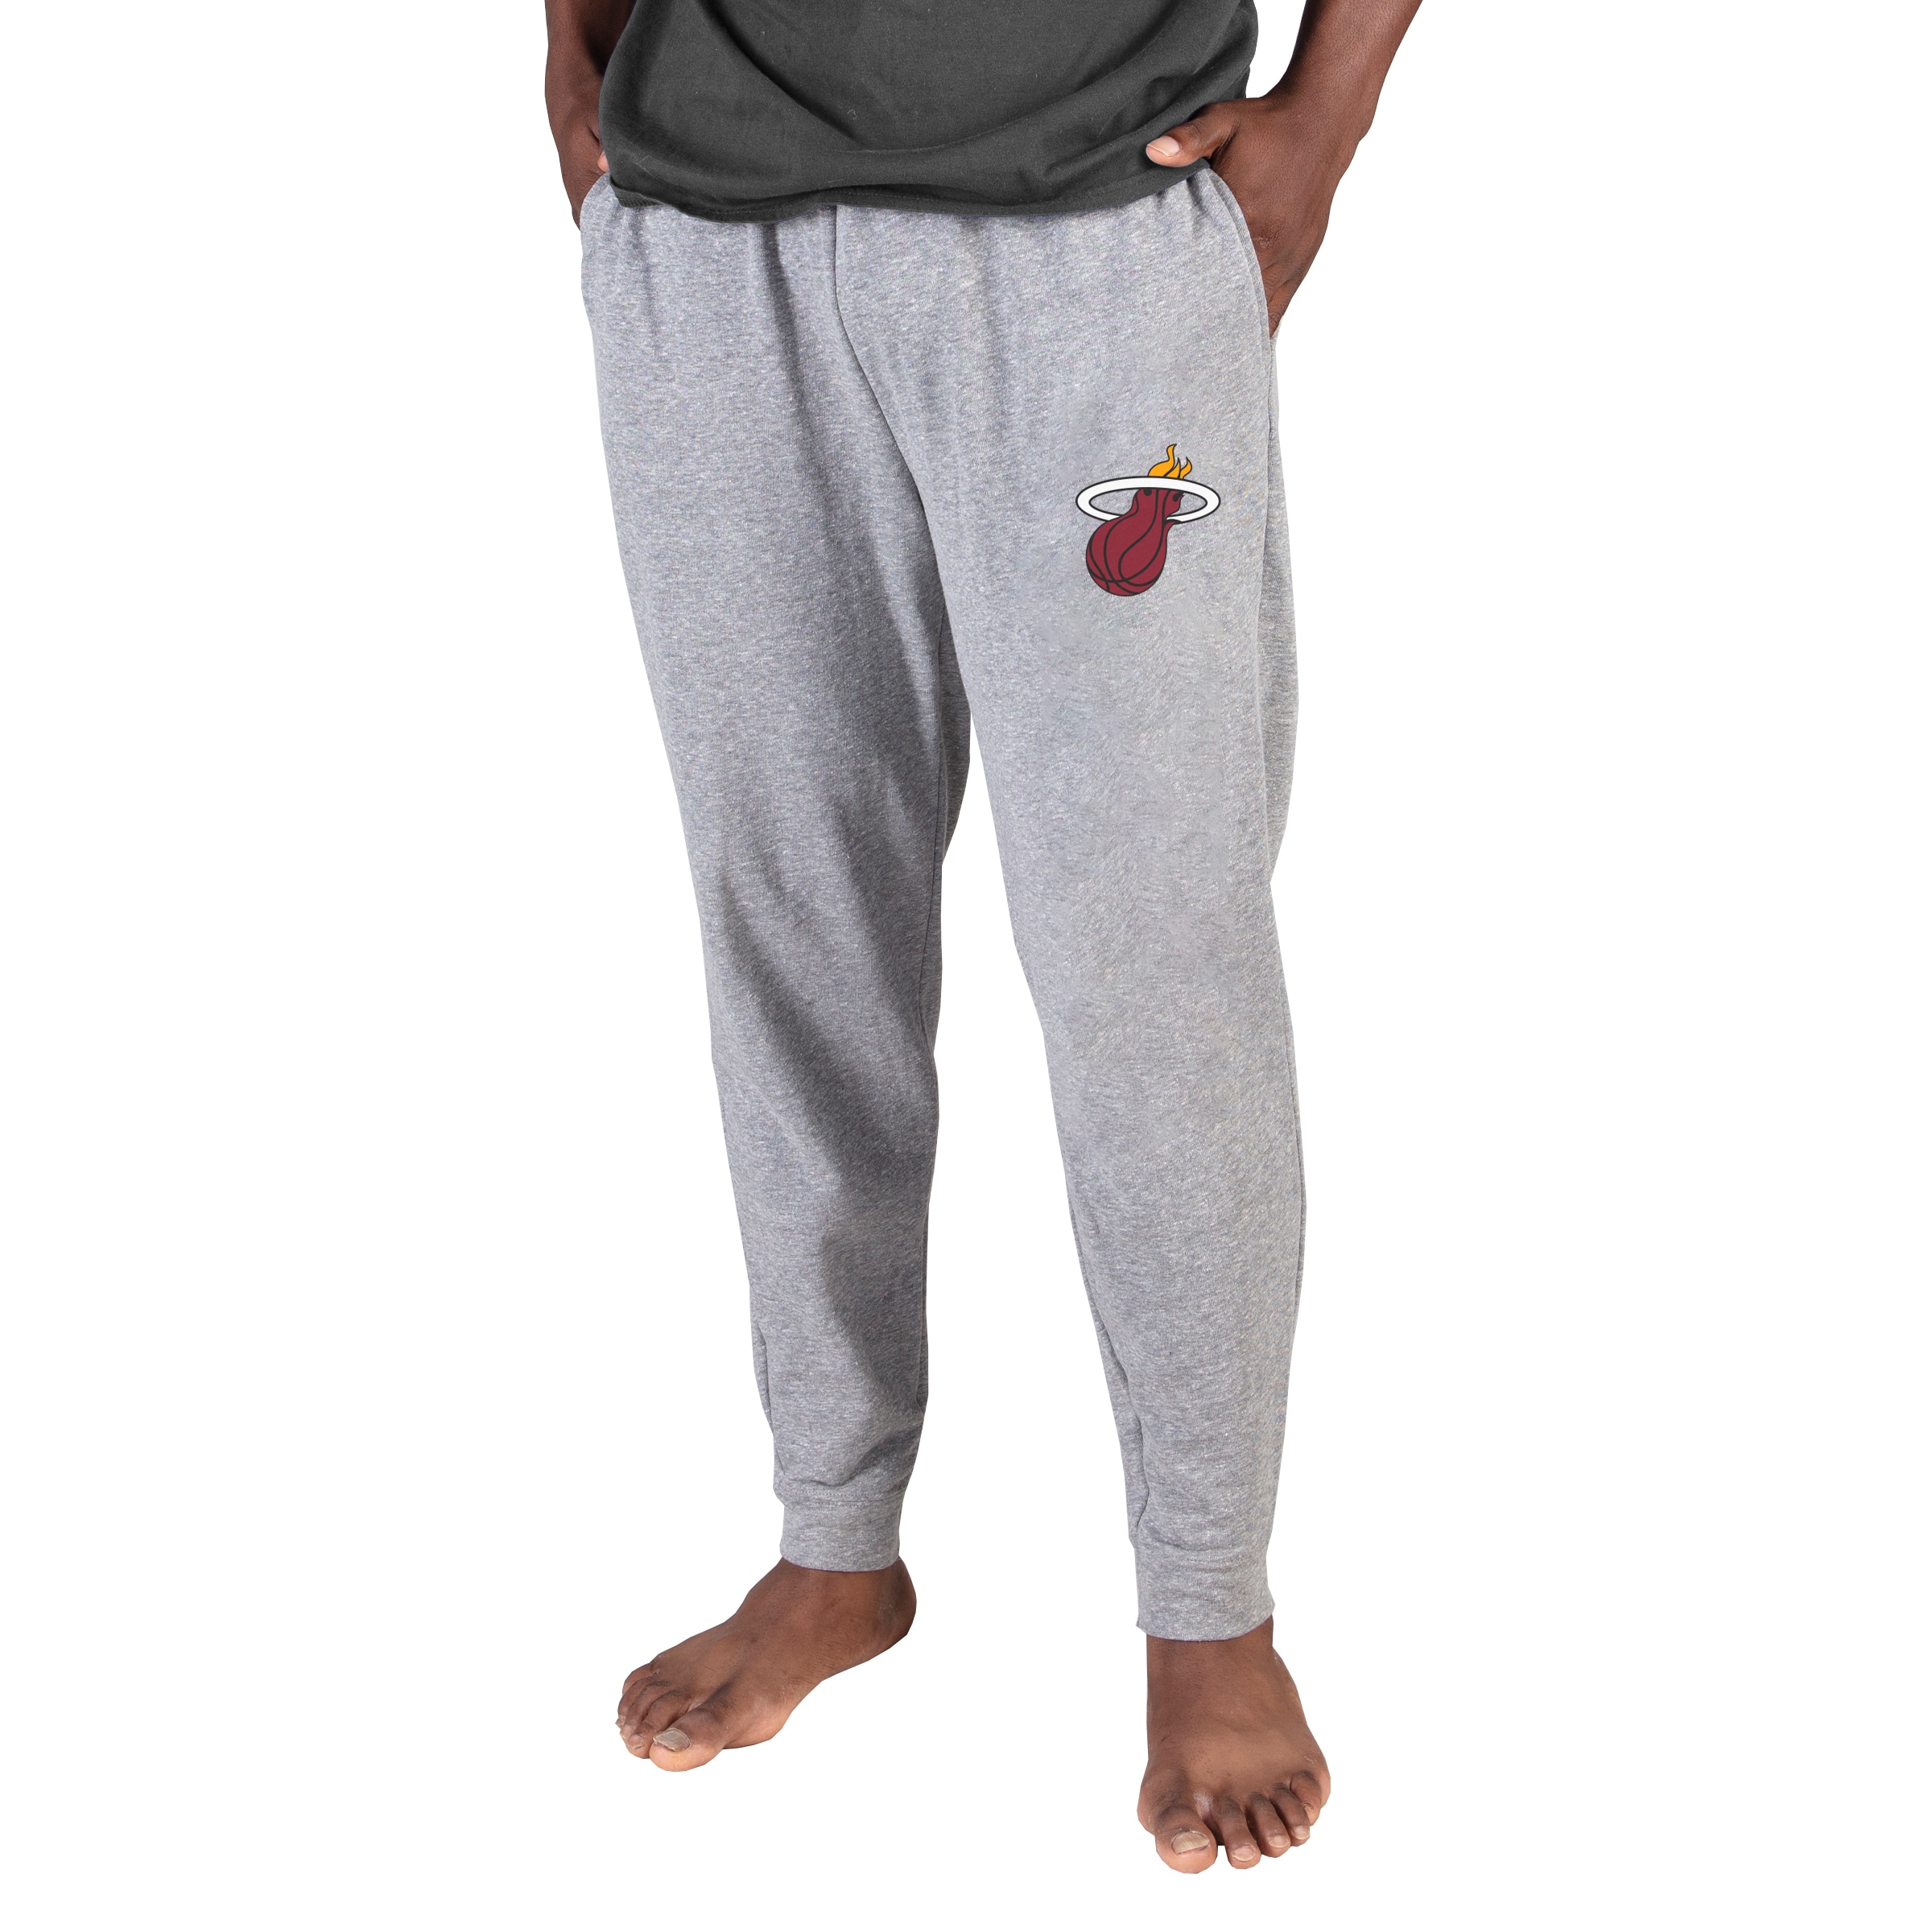 Men's Concepts Sport Gray Miami Heat Mainstream Cuffed Terry Pants - image 1 of 1